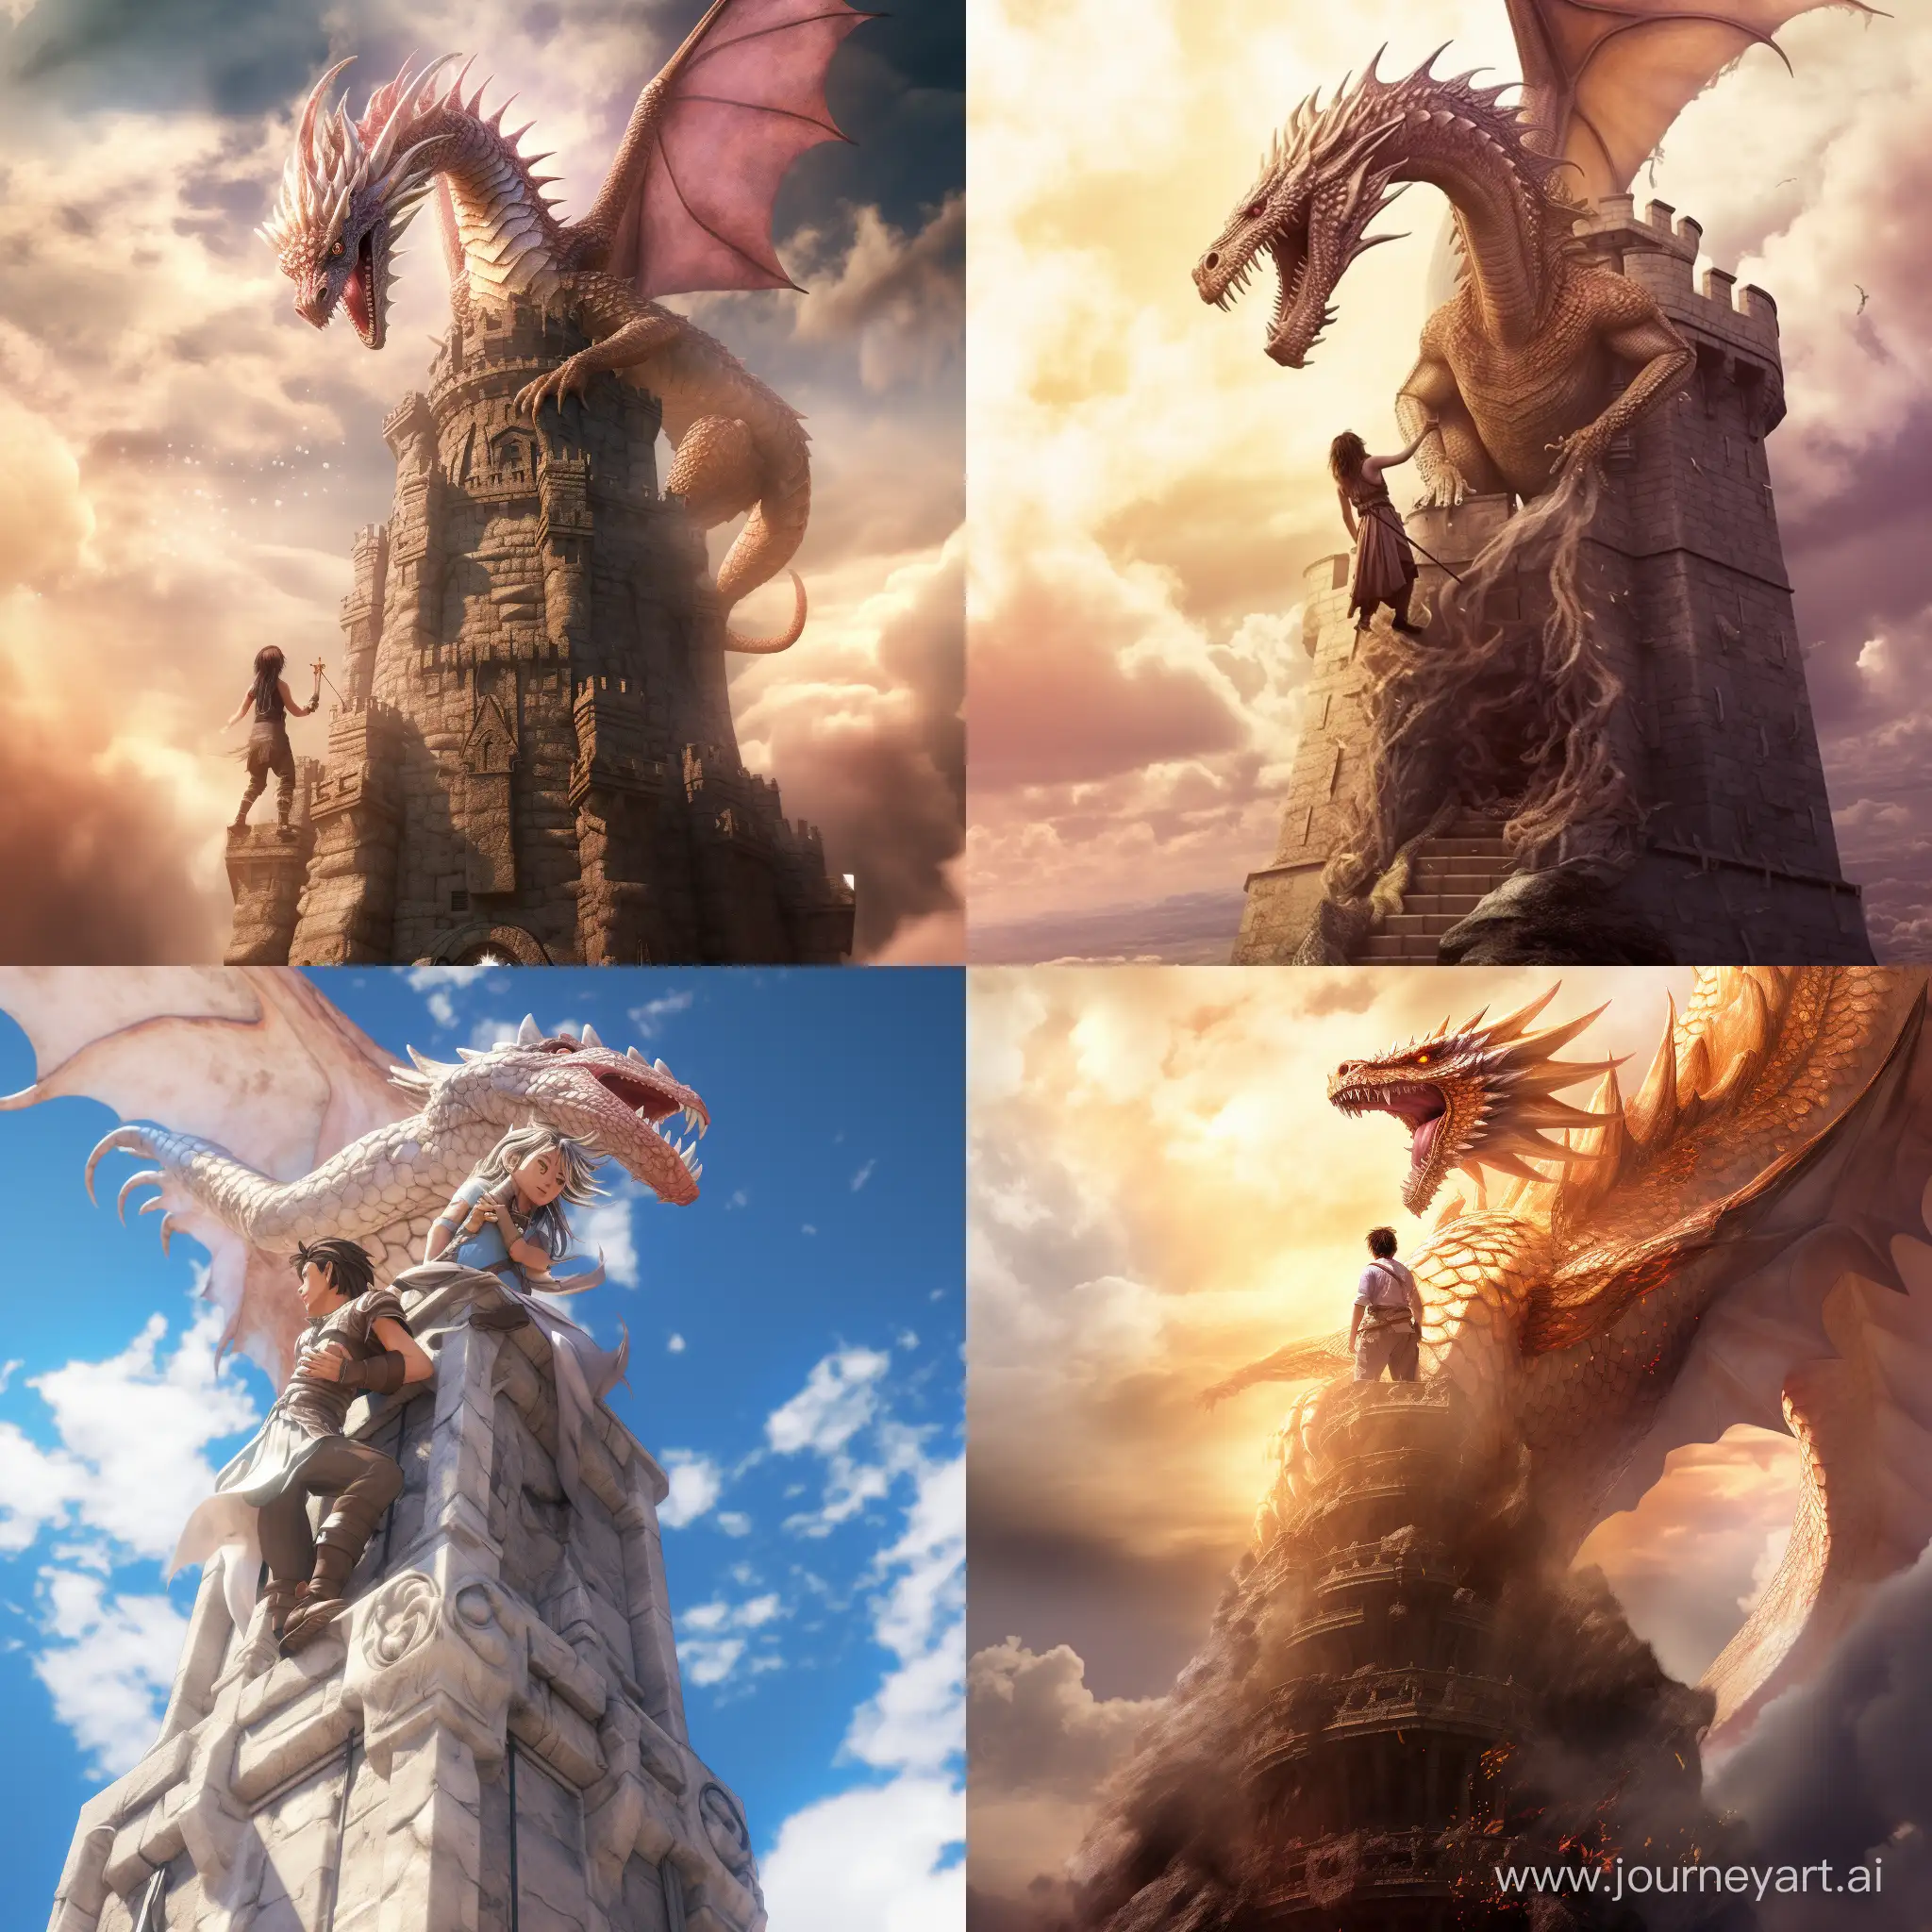 Brave-Man-Climbing-Tower-to-Save-Queen-from-Dragon